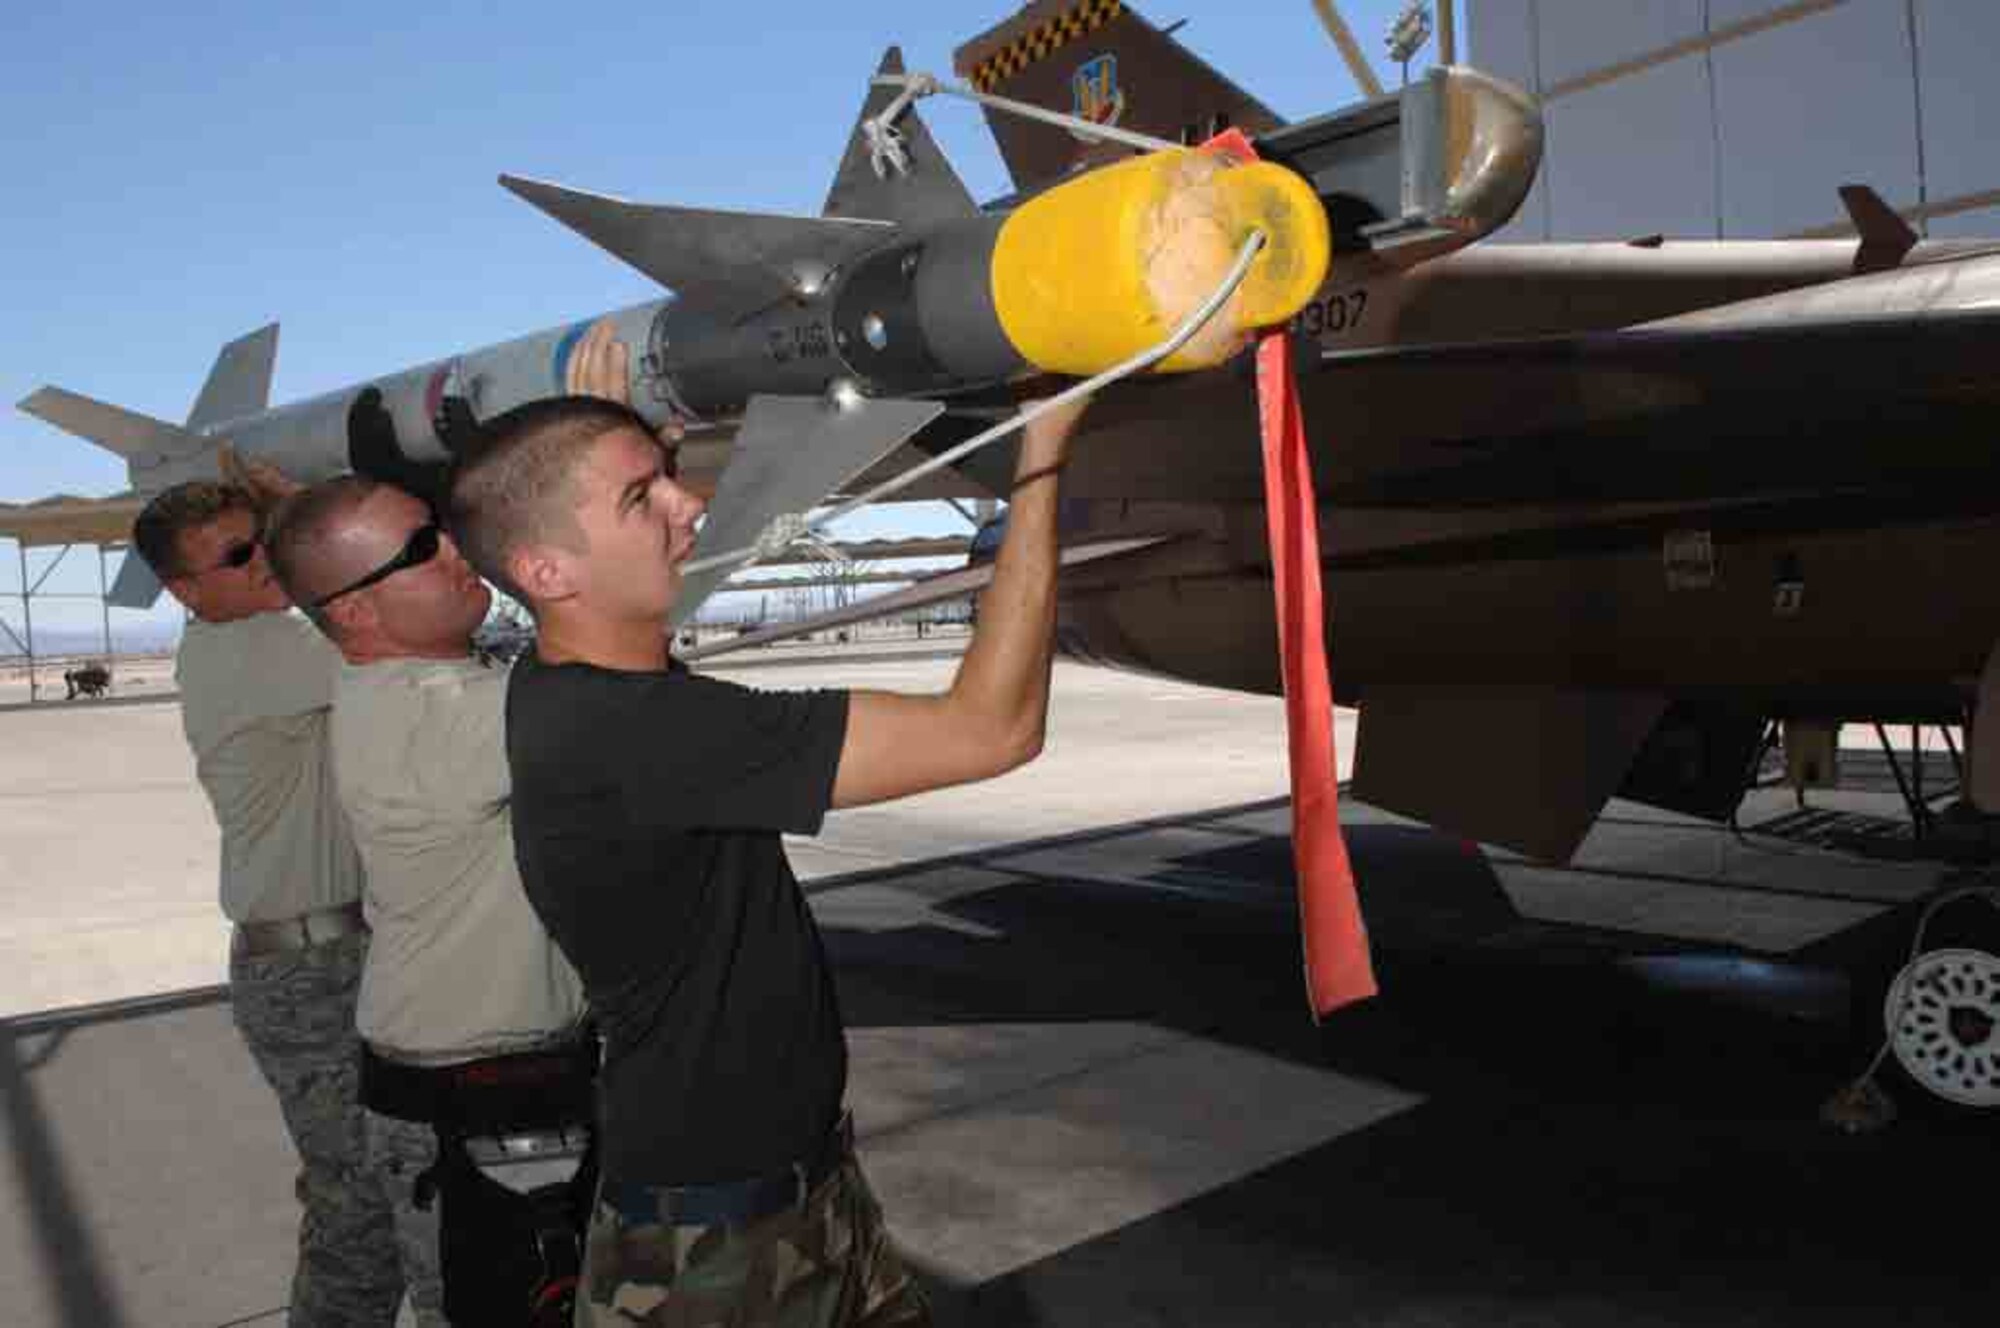 (left to right) Senior Airman Gregory Strouse, 57th Aircraft Maintenance Squadron F-16 weapons load crew member, Staff Sgt. Sean Minnick, 926th Group Detachment 2 F-16 weapons loader team chief, and Senior Airman David Garrison, 57th AMXS F-16 weapons load crew member, load a missile onto an F-16 July 24, 2008 at Nellis Air Force Base, Nev. The 926th Group is an Air Force Reserve unit under 10th Air Force, Naval Air Station Joint Reserve Base, Fort Worth, Texas. The group activated in October 2007 at Nellis Air Force Base as an associate unit to the United States Air Force Warfare Center. Through Total Force Integration, reservists are integrated into regular Air Force units, accomplishing the USAFWC's mission alongside REGAF personnel on a daily basis. Through TFI, the USAFWC provides the mission assets and the 926th Group provides manpower. 
(U.S. Air Force Photo/Senior Airman Larry E. Reid Jr., Released)